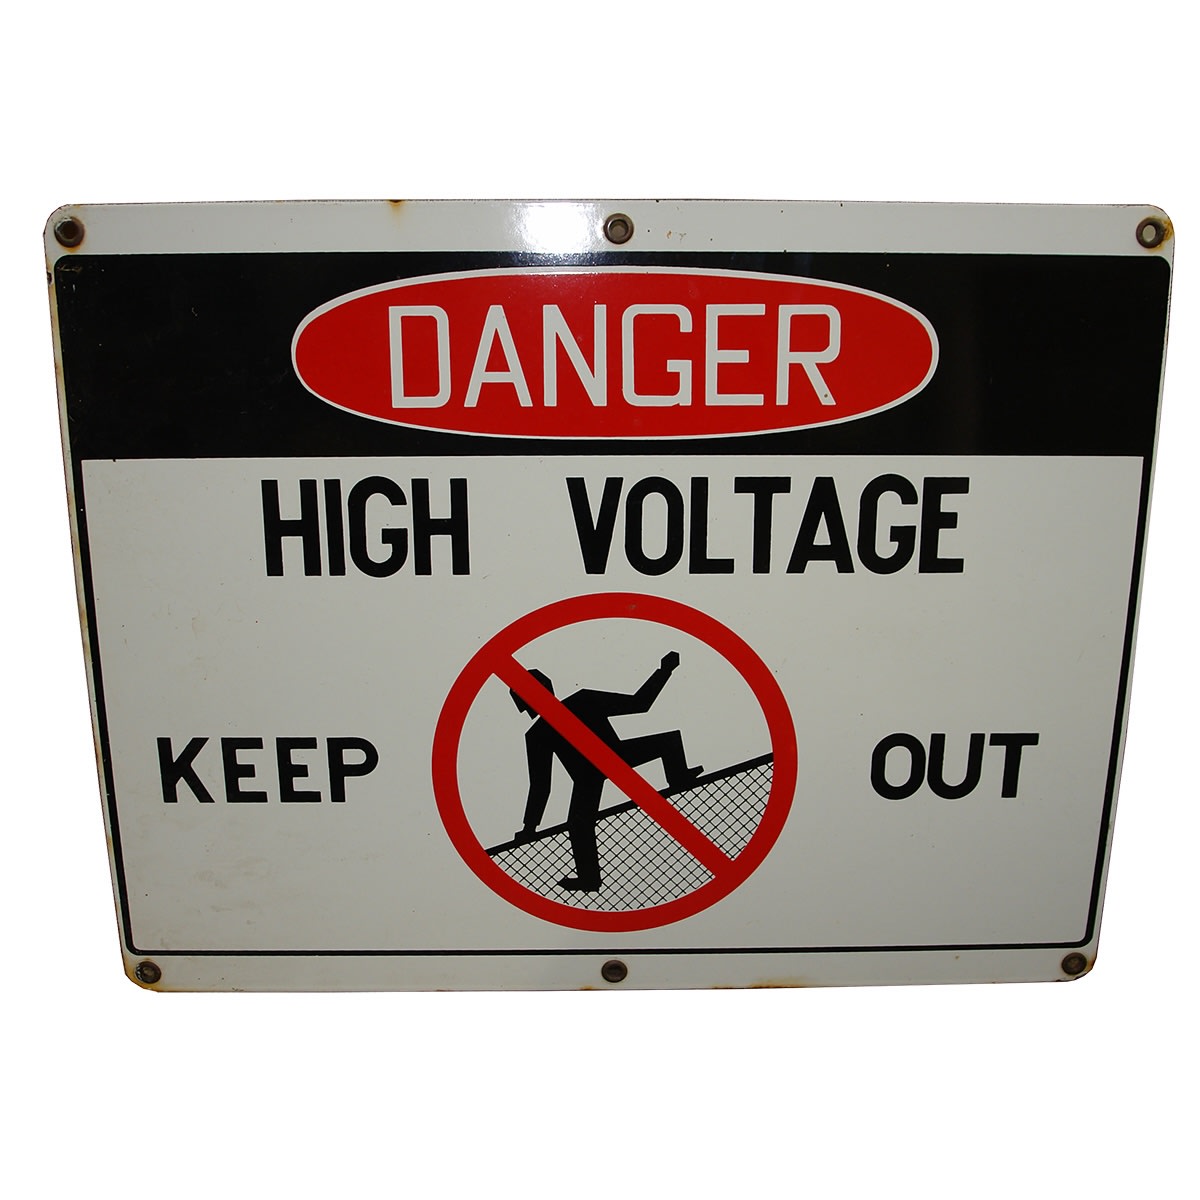 Enamel Sign. Danger High Voltage. Keep Out. Red circle & line through a man climbing a fence.